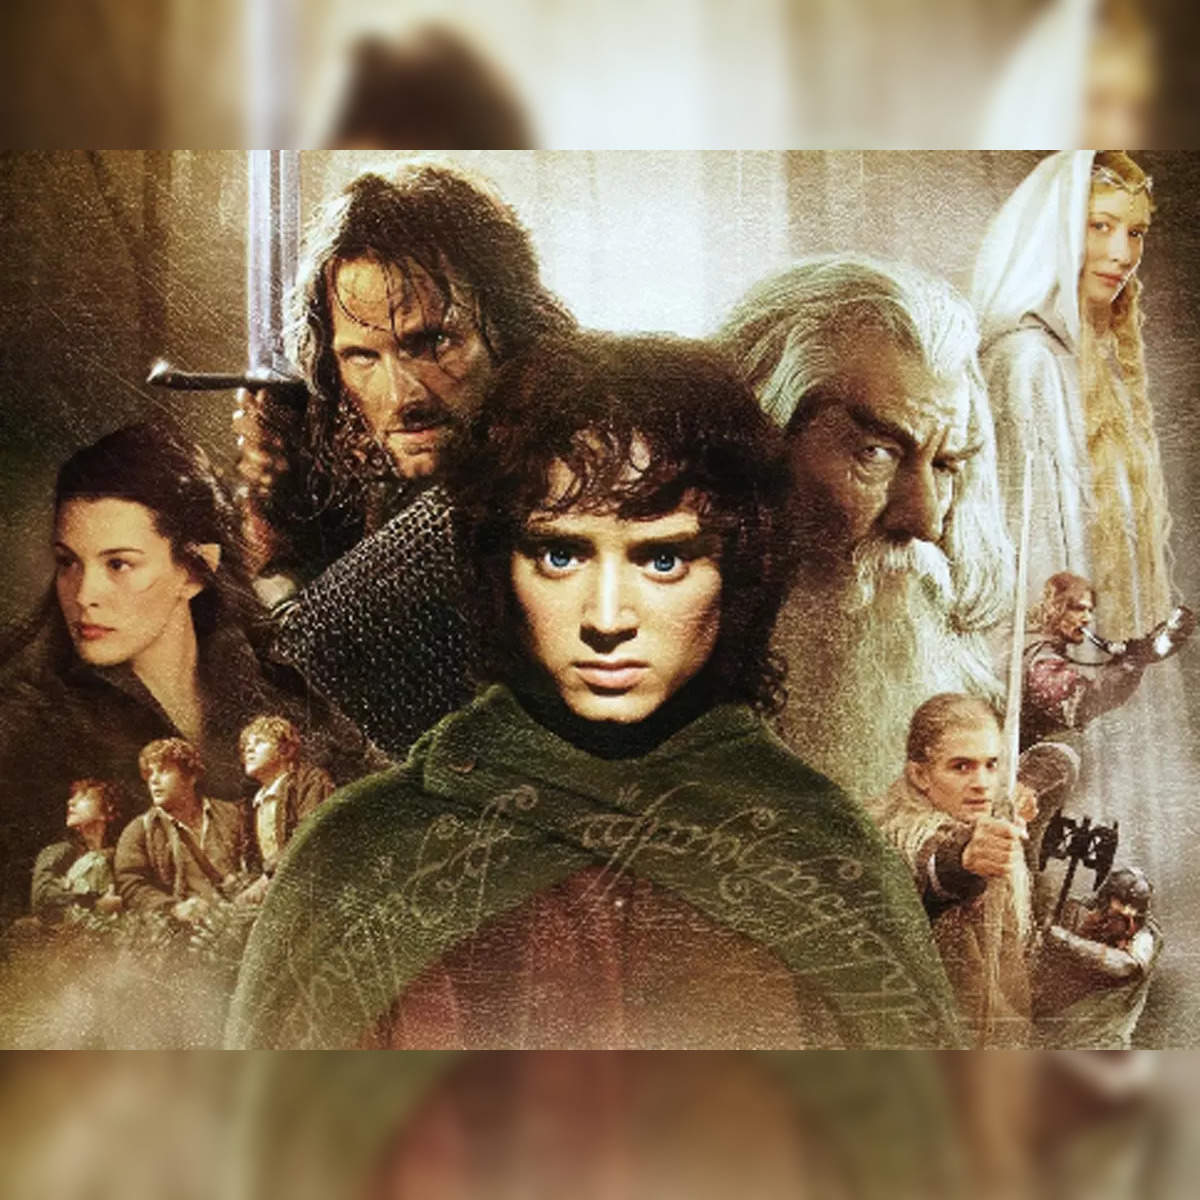 Meet 13 key characters from The Lord of the Rings: The Rings of Power